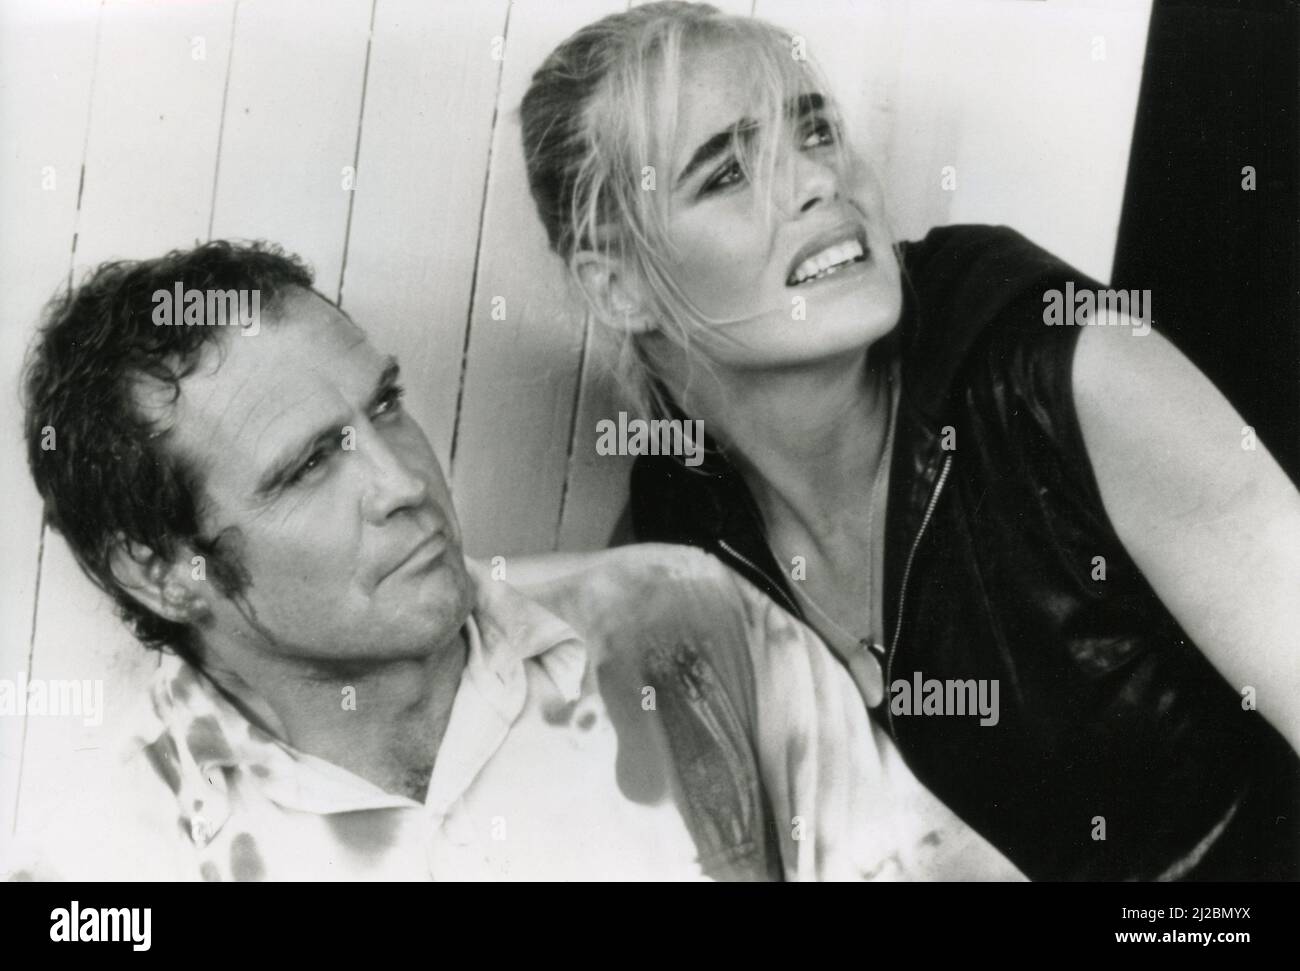 American model and actress Margaux Hemingway and actor Lee Major in the movie Killer Fish, 1987 Stock Photo